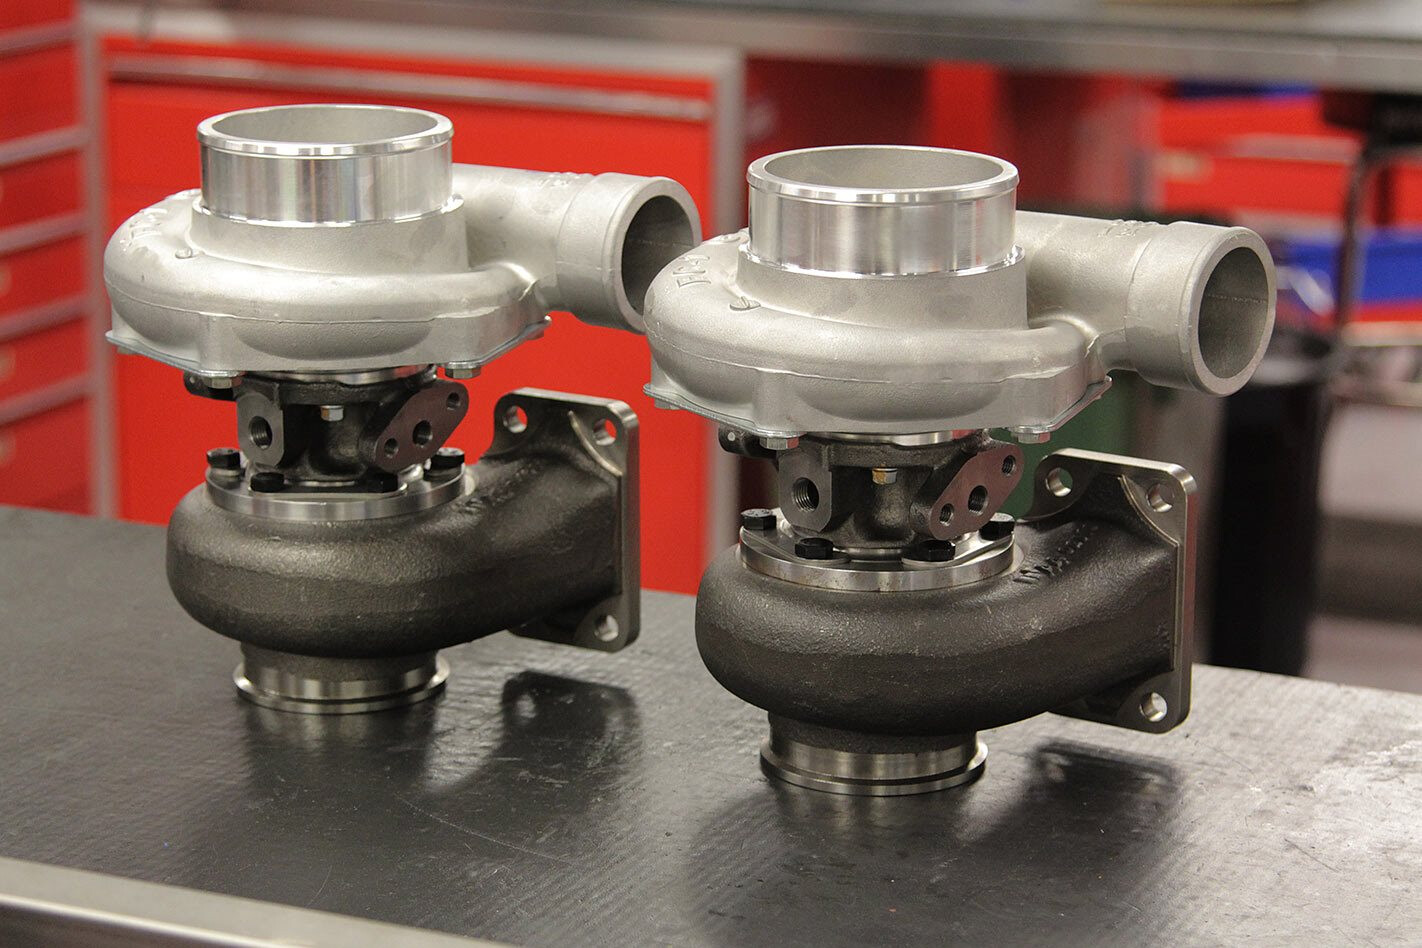 NEW TURBOS FOR OUR LS1-POWERED MAZDA MX-5 – VIDEO